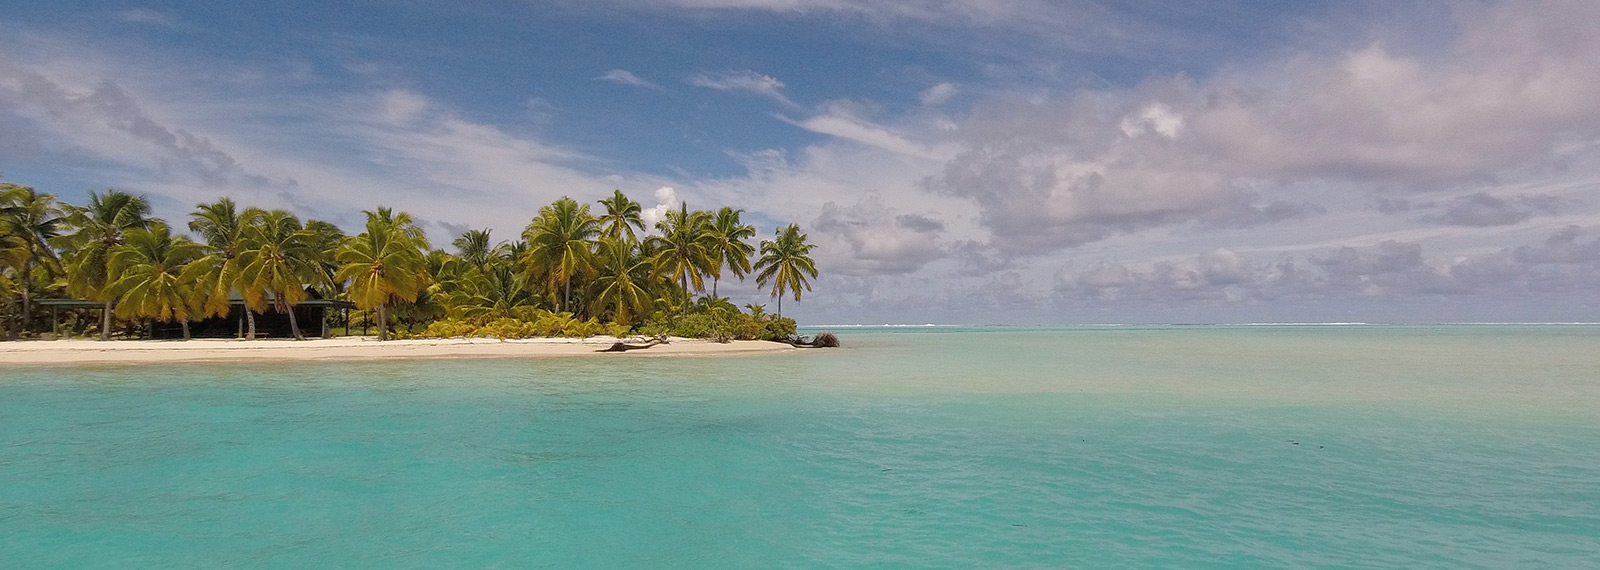 Stay and relax in Cook Islands - Cook Islands travel guide